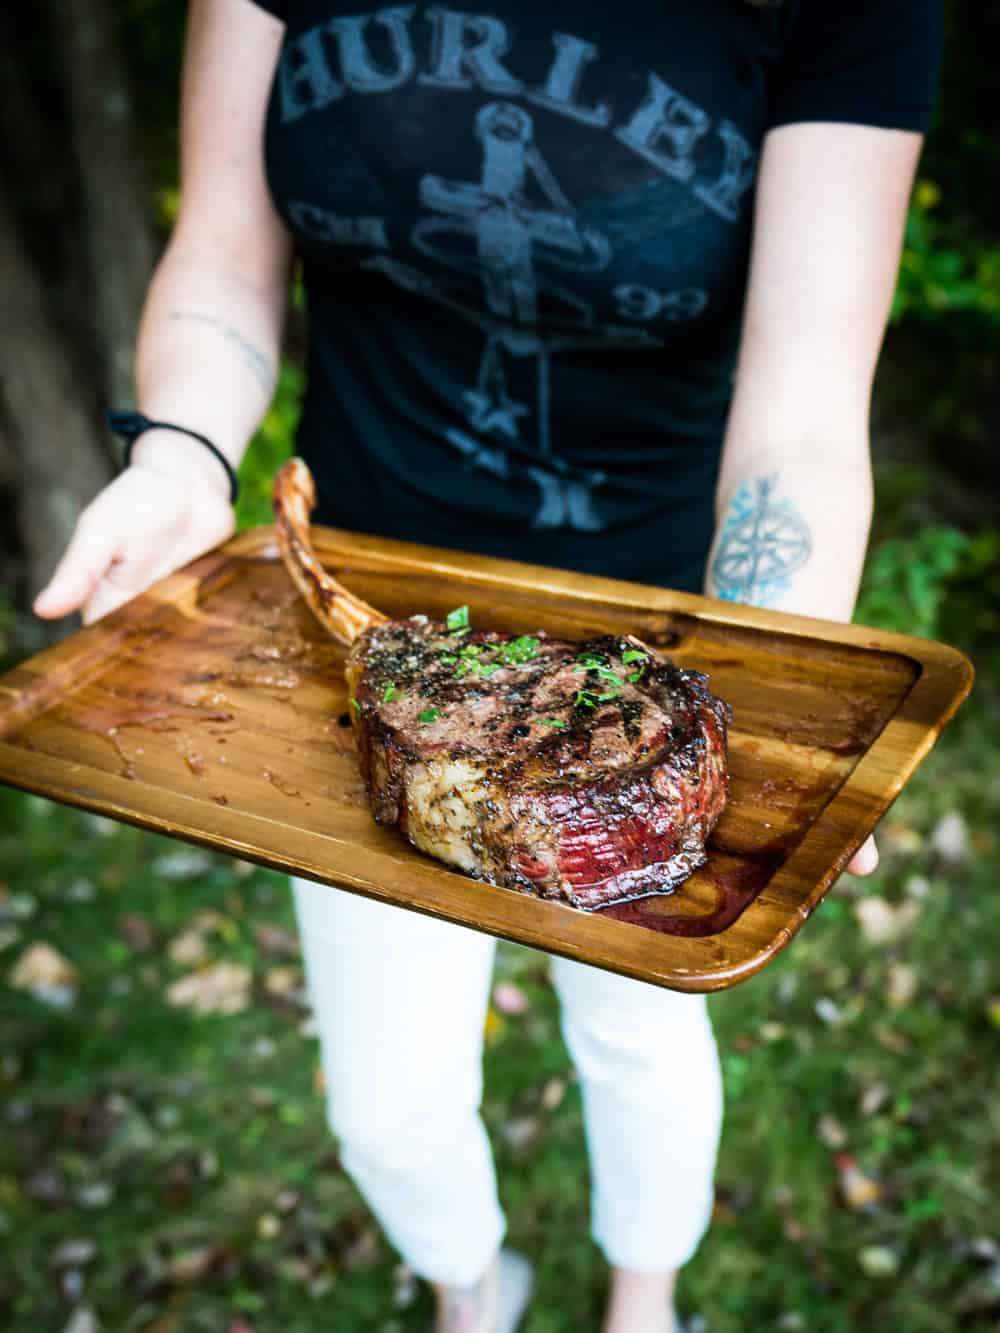 A person wearing a black t-shirt and white pants holds a wooden tray with a grilled tomahawk steak garnished with herbs.